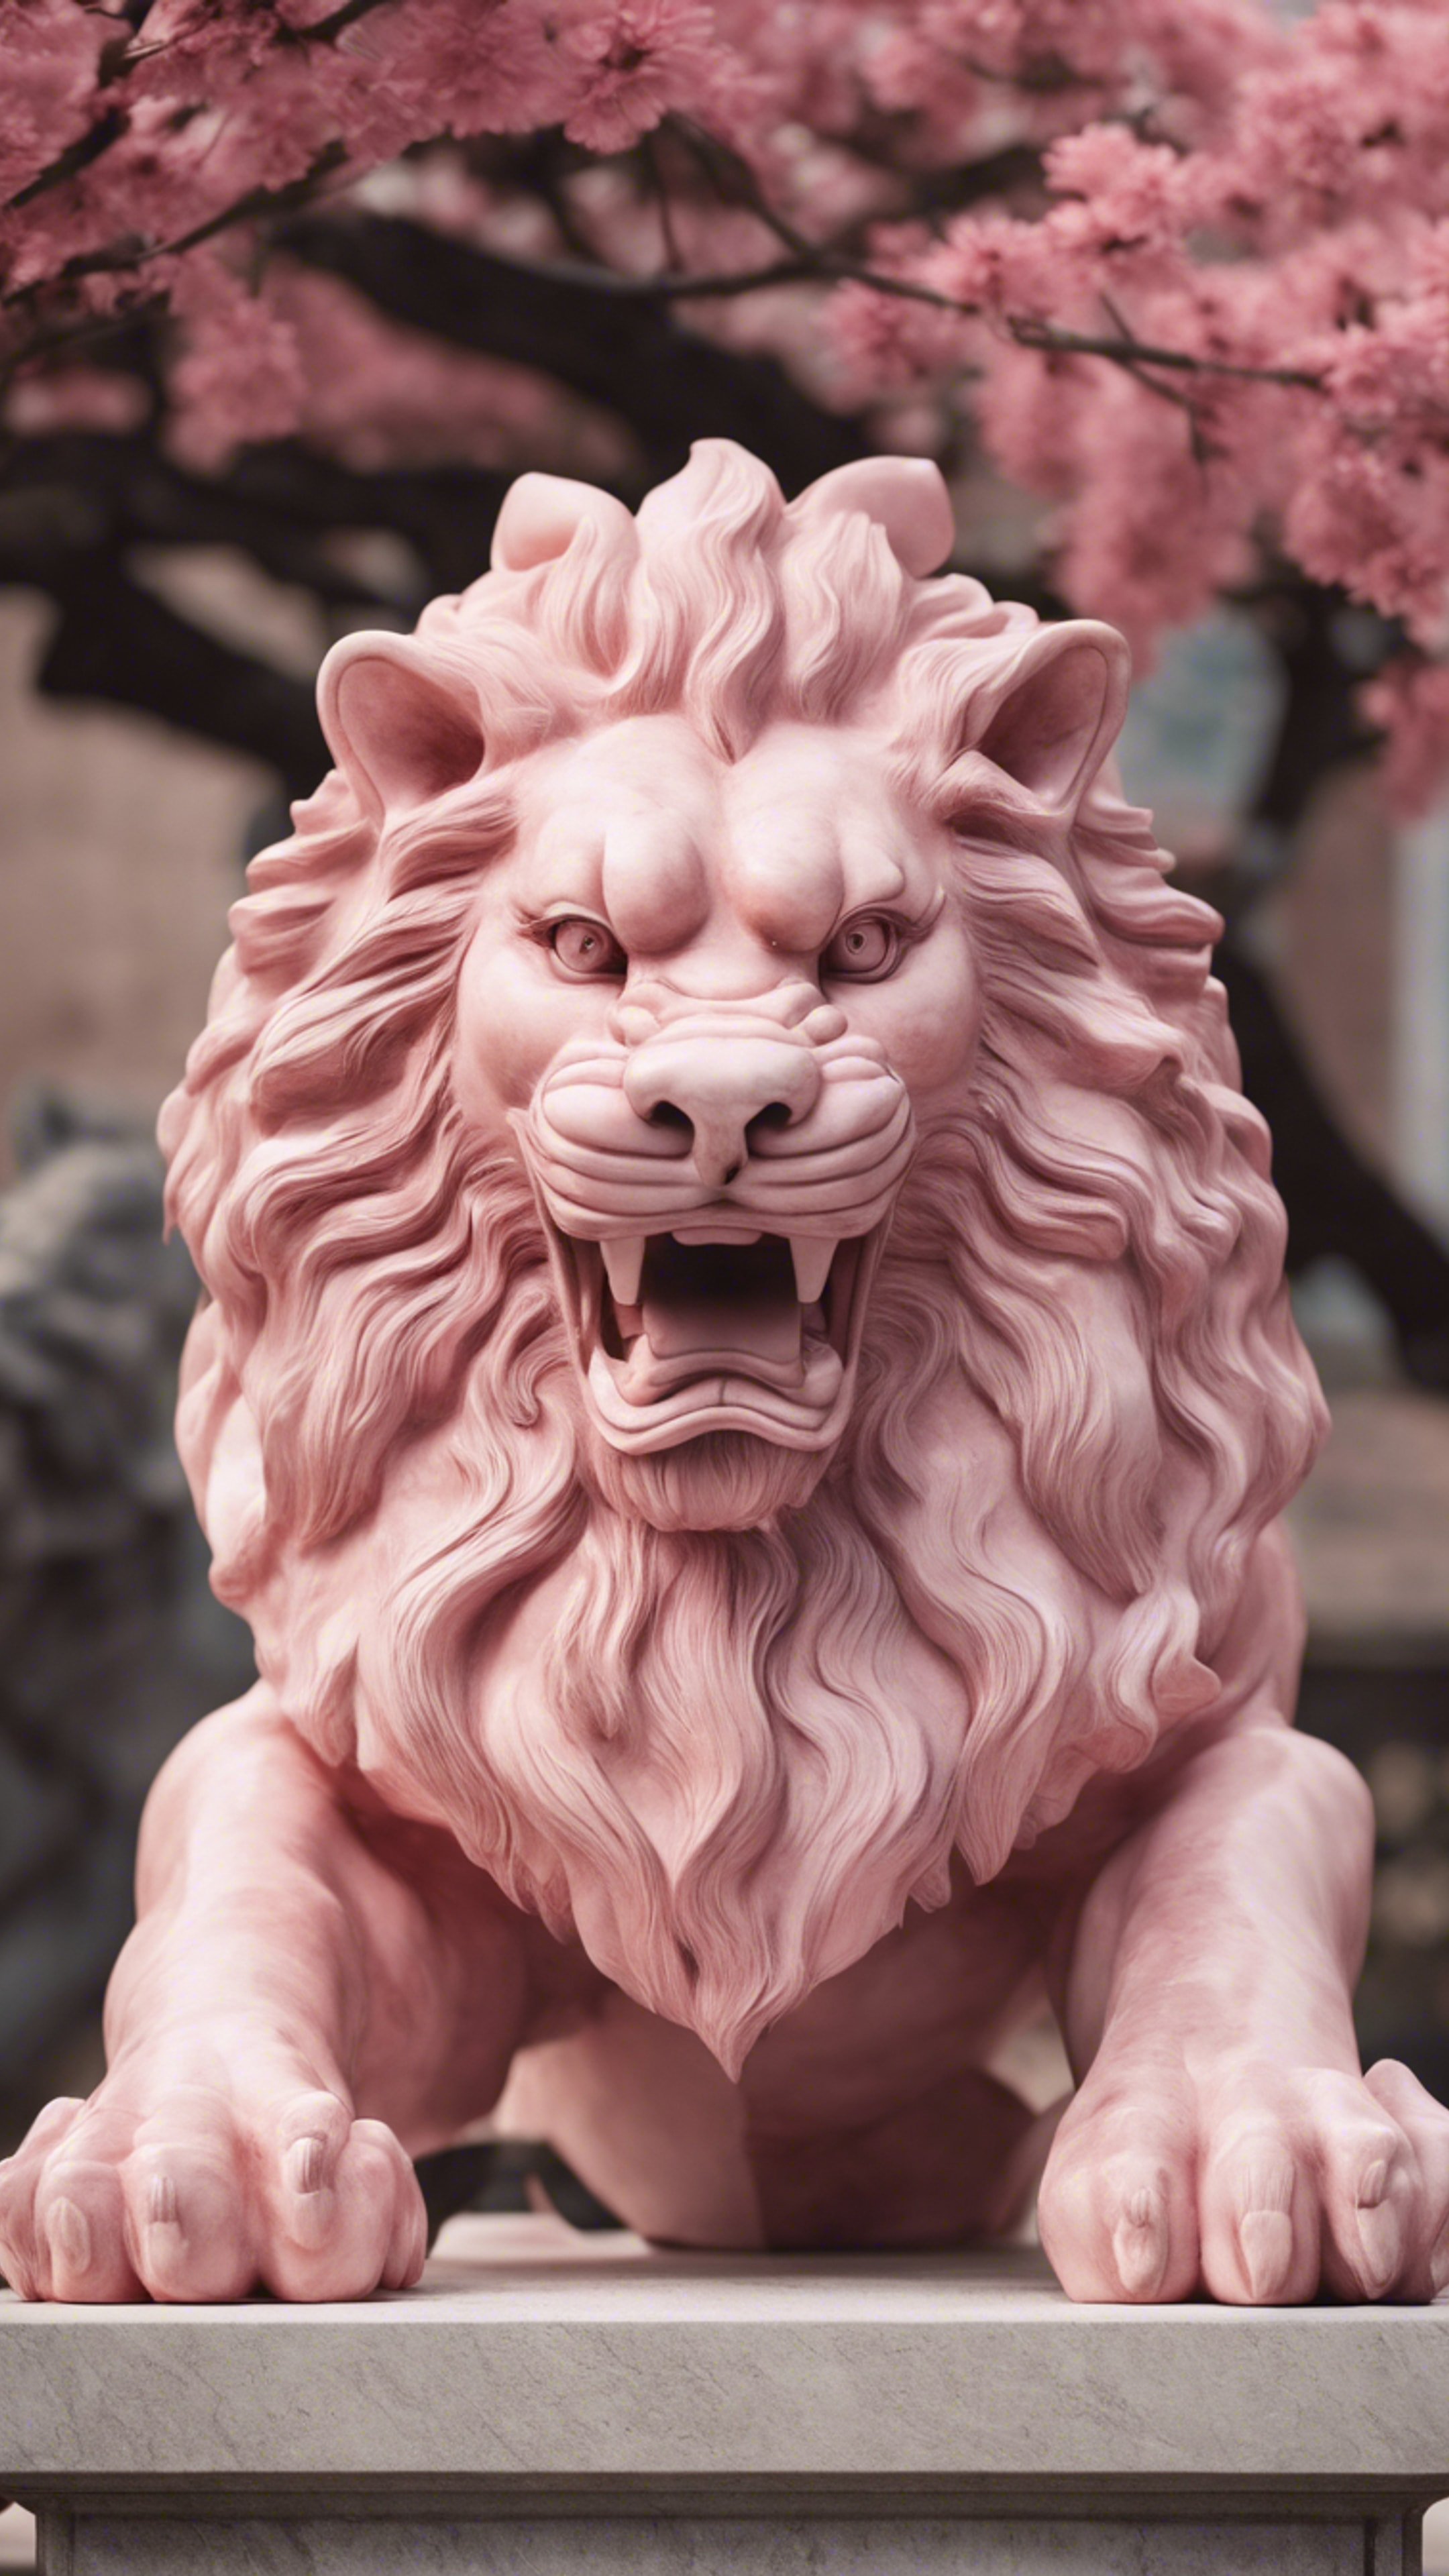 A three-dimensional bust of a Chinese lion sculpture, entirely in pink marble.壁紙[0c551ec5e2464905b8c4]